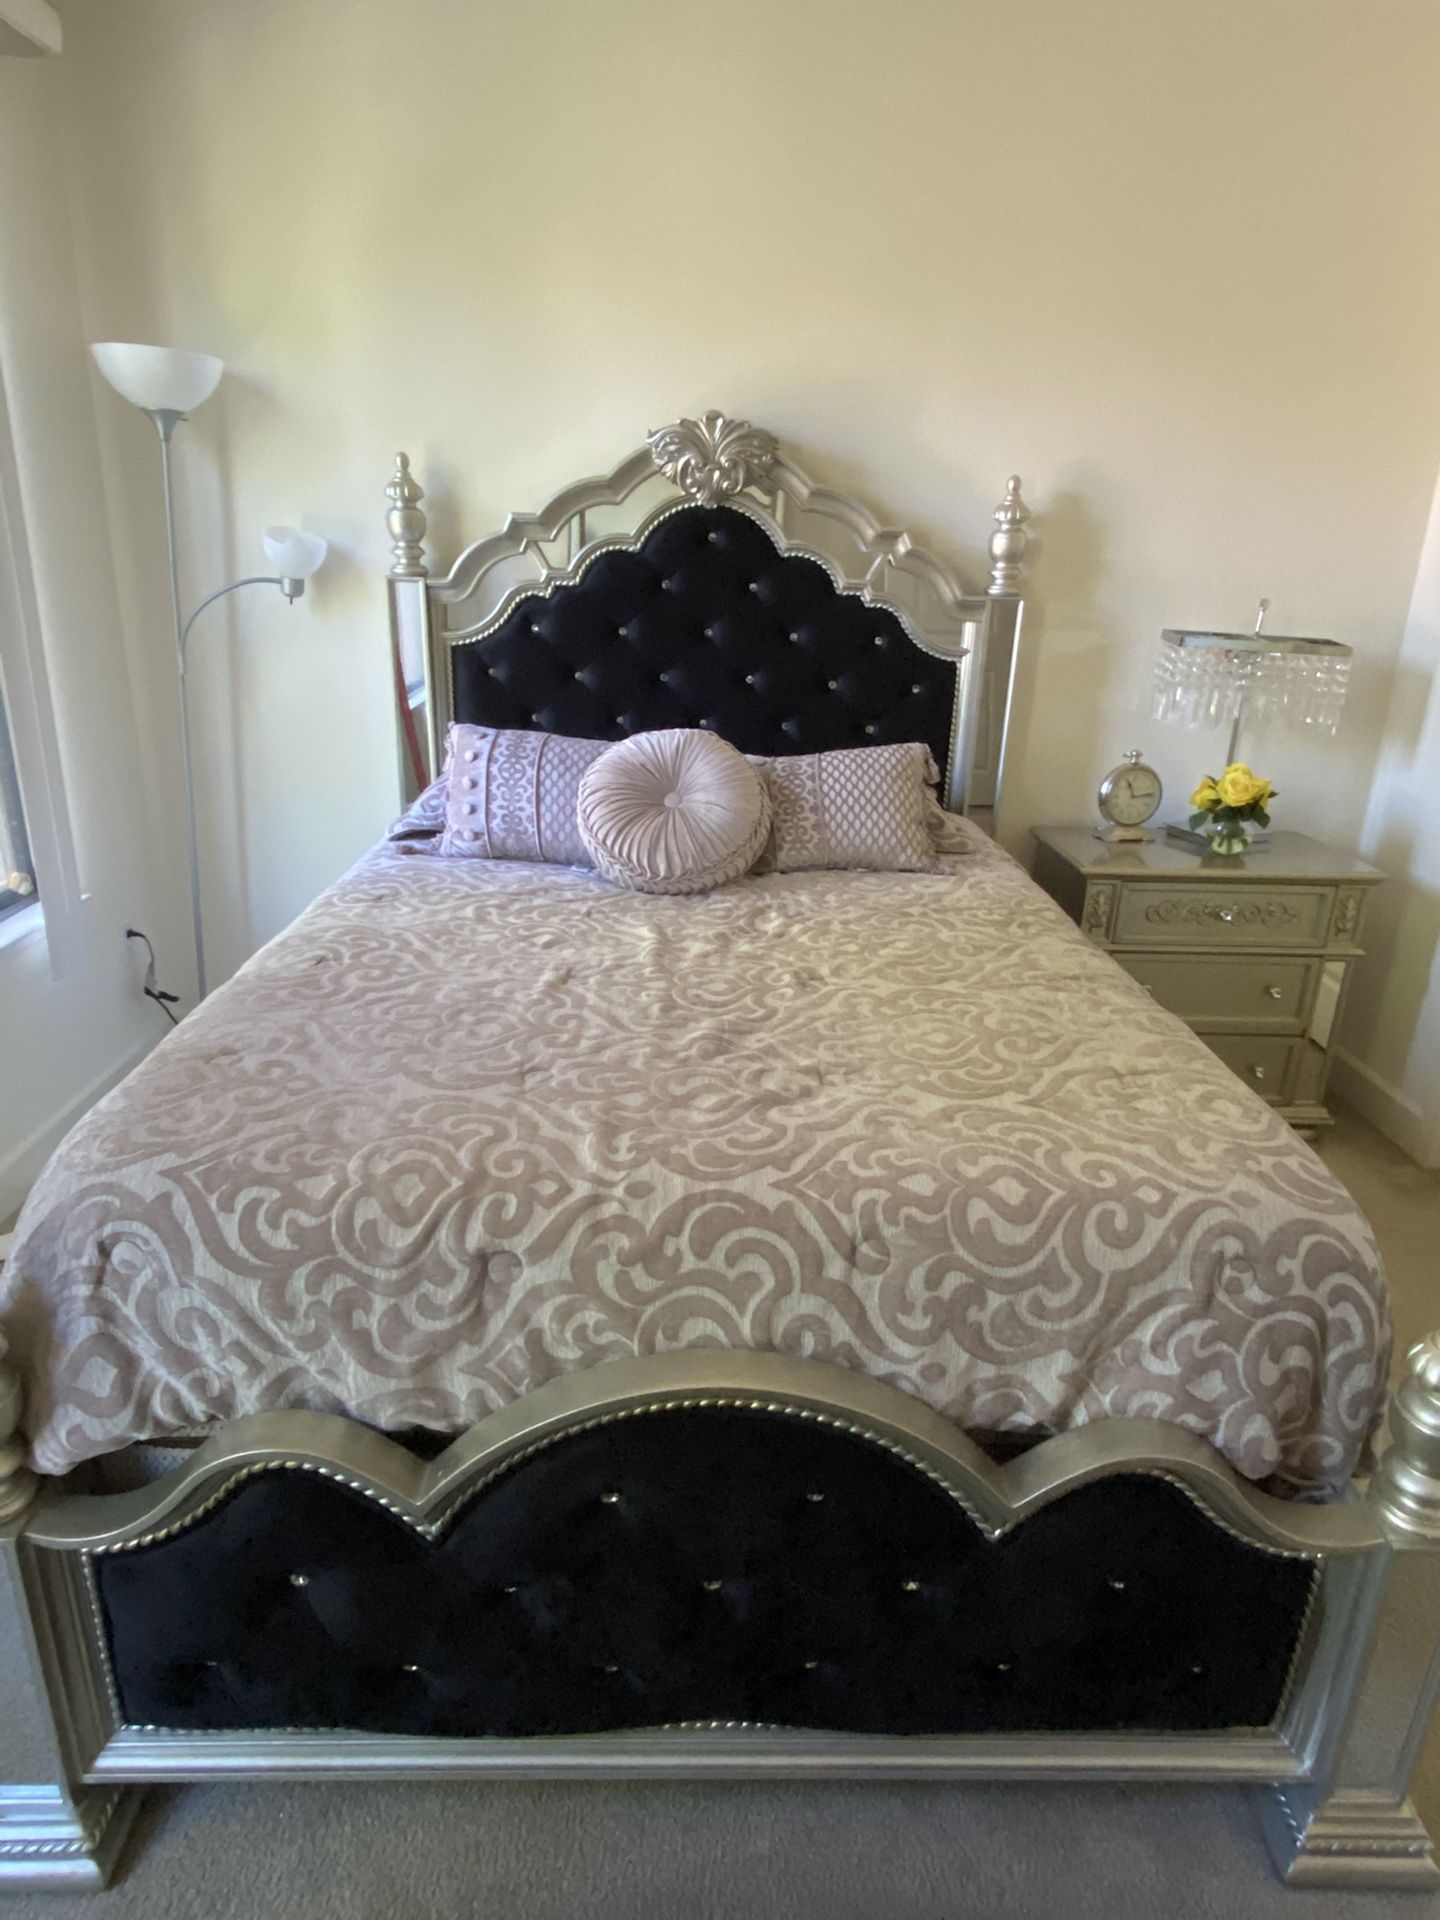 laxuary black and silver valvet tufted queen size bed set